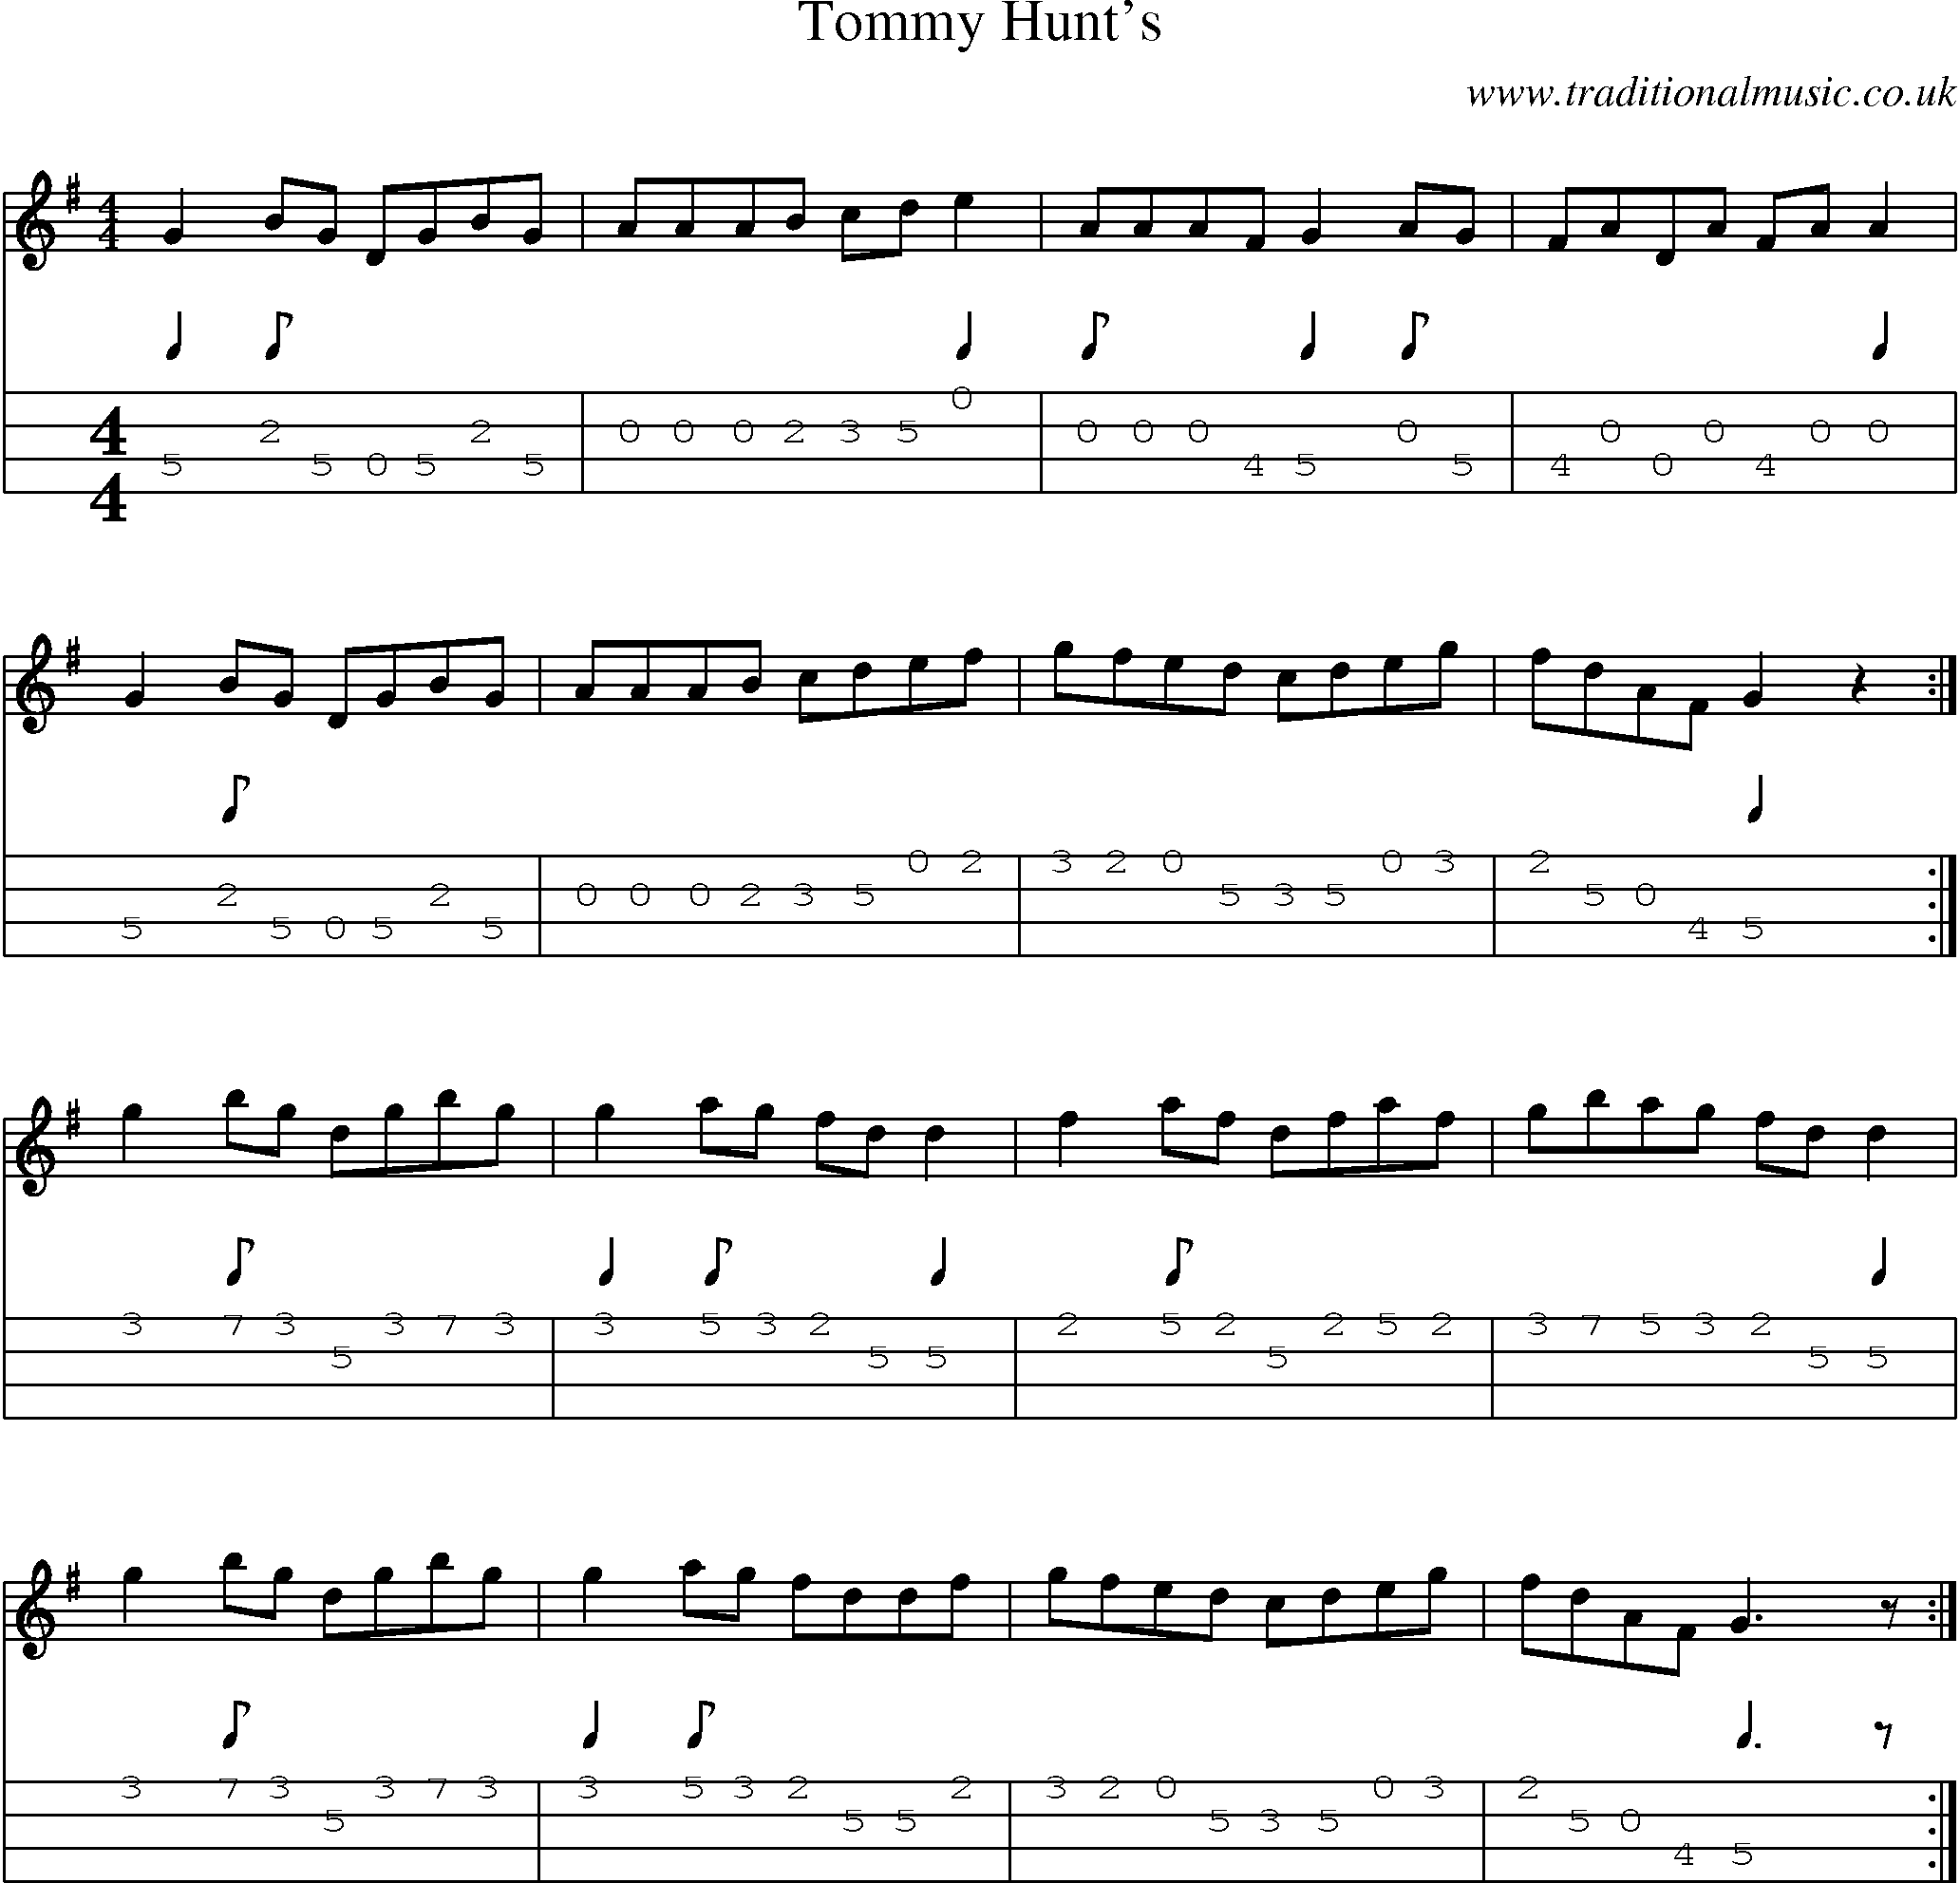 Music Score and Mandolin Tabs for Tommy Hunts